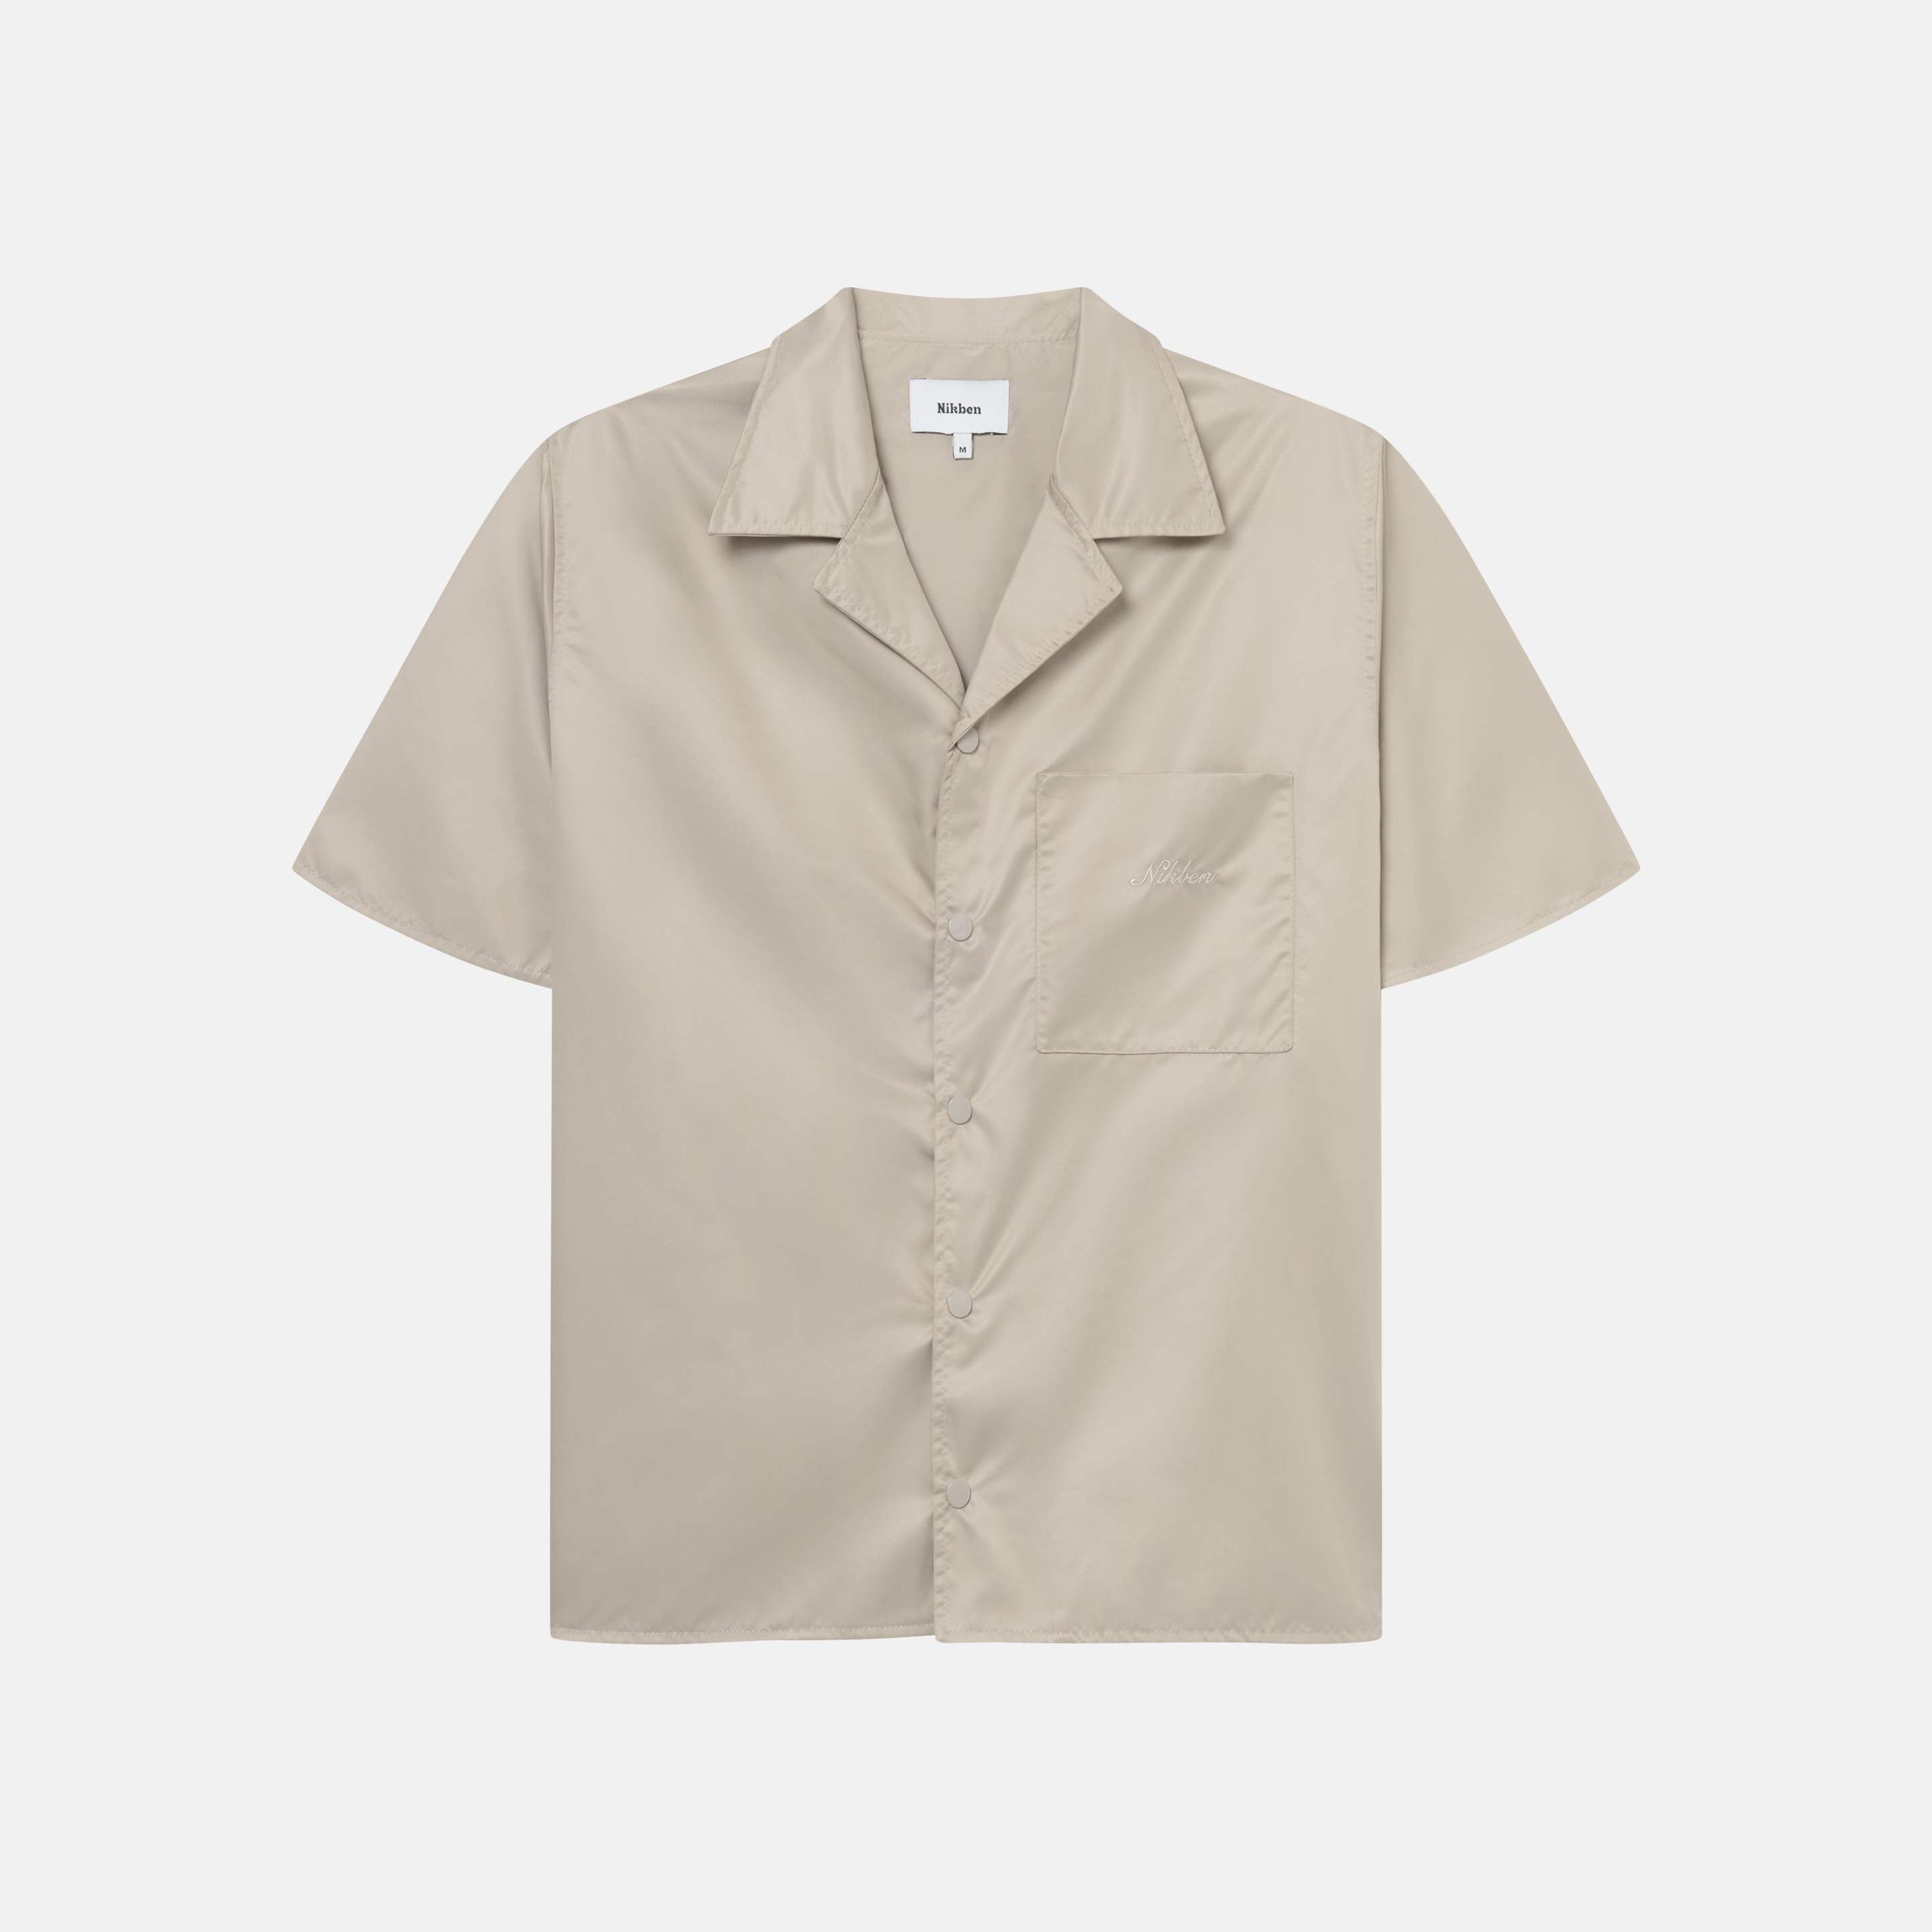 A beige short-sleeved shirt with snap button closure and embroidered Nikben logo on the breast pocket